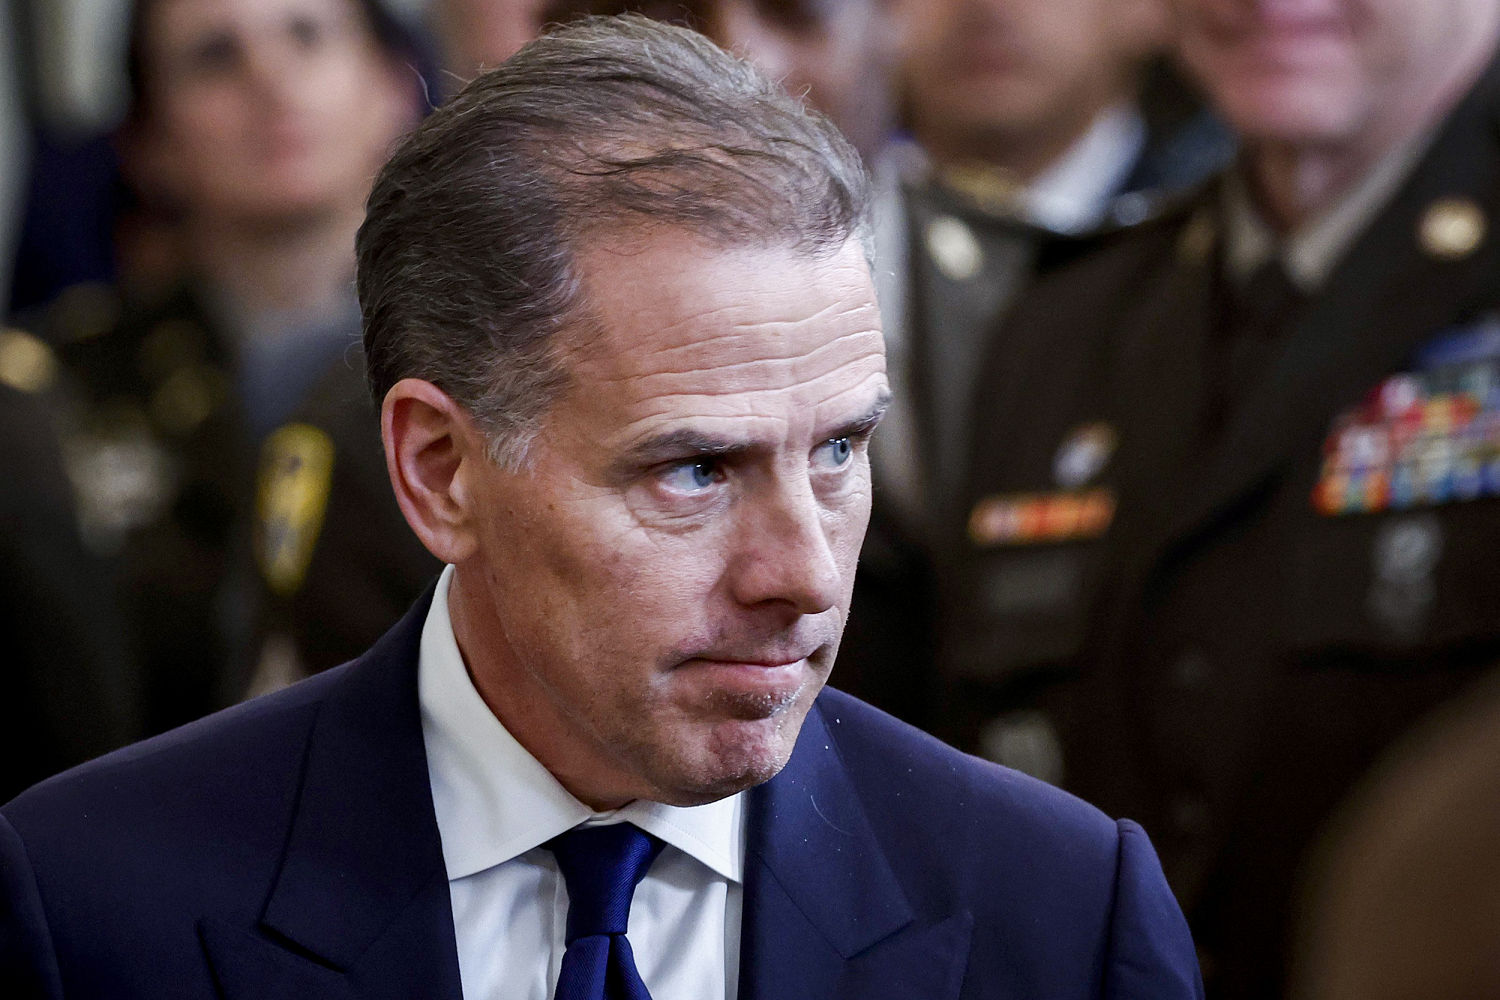 Hunter Biden argues his conviction should be tossed, citing judge's ruling in Trump documents case